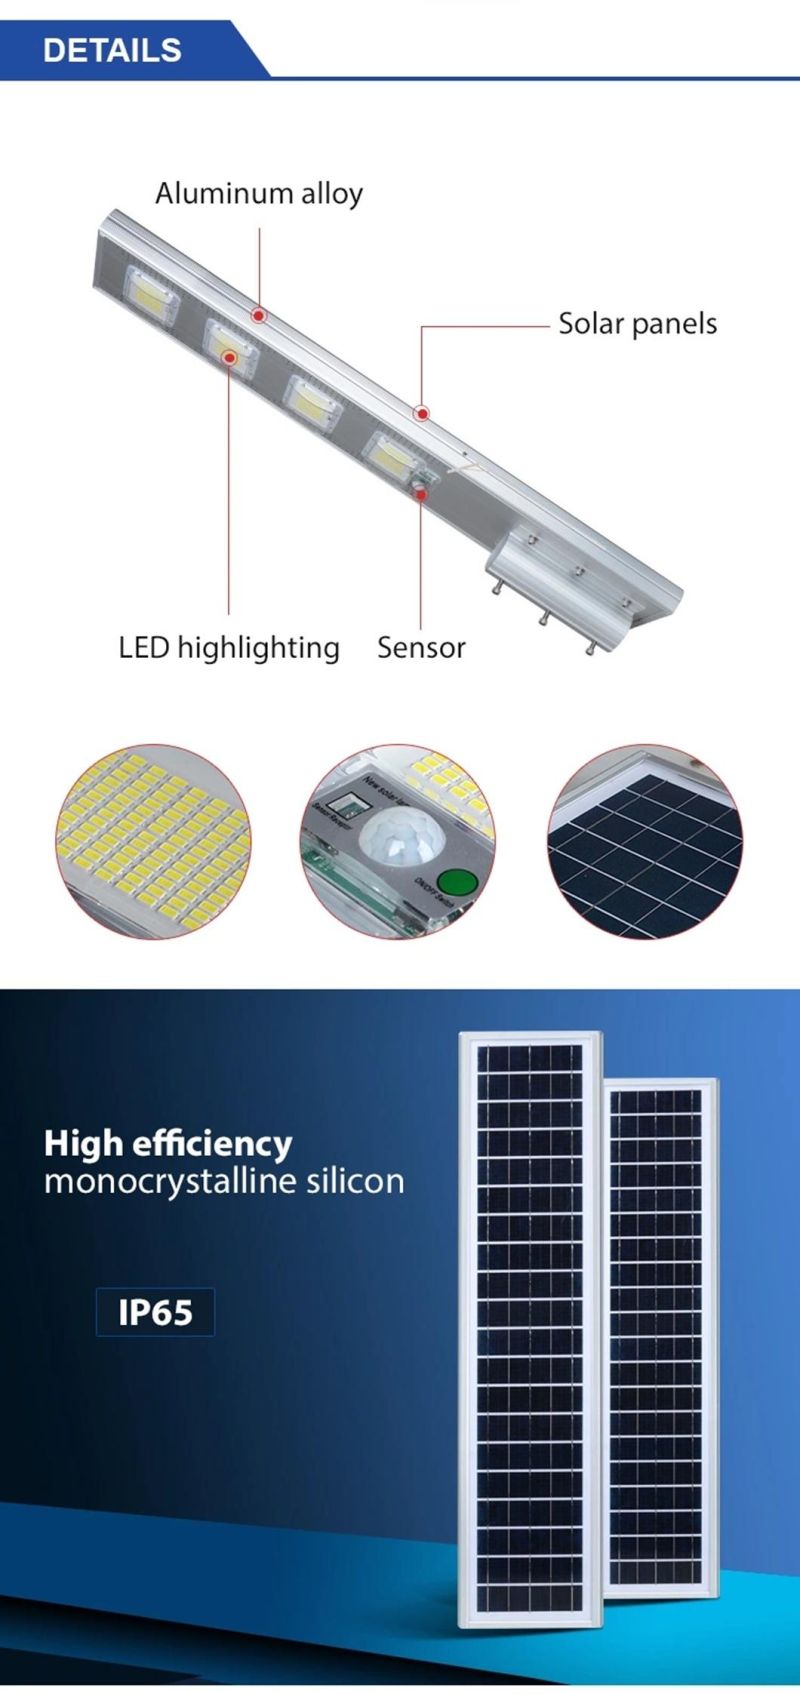 Outdoor All in One/ Integrated Solar LED Street Road Light Garden Light with Panel and Lithium Battery